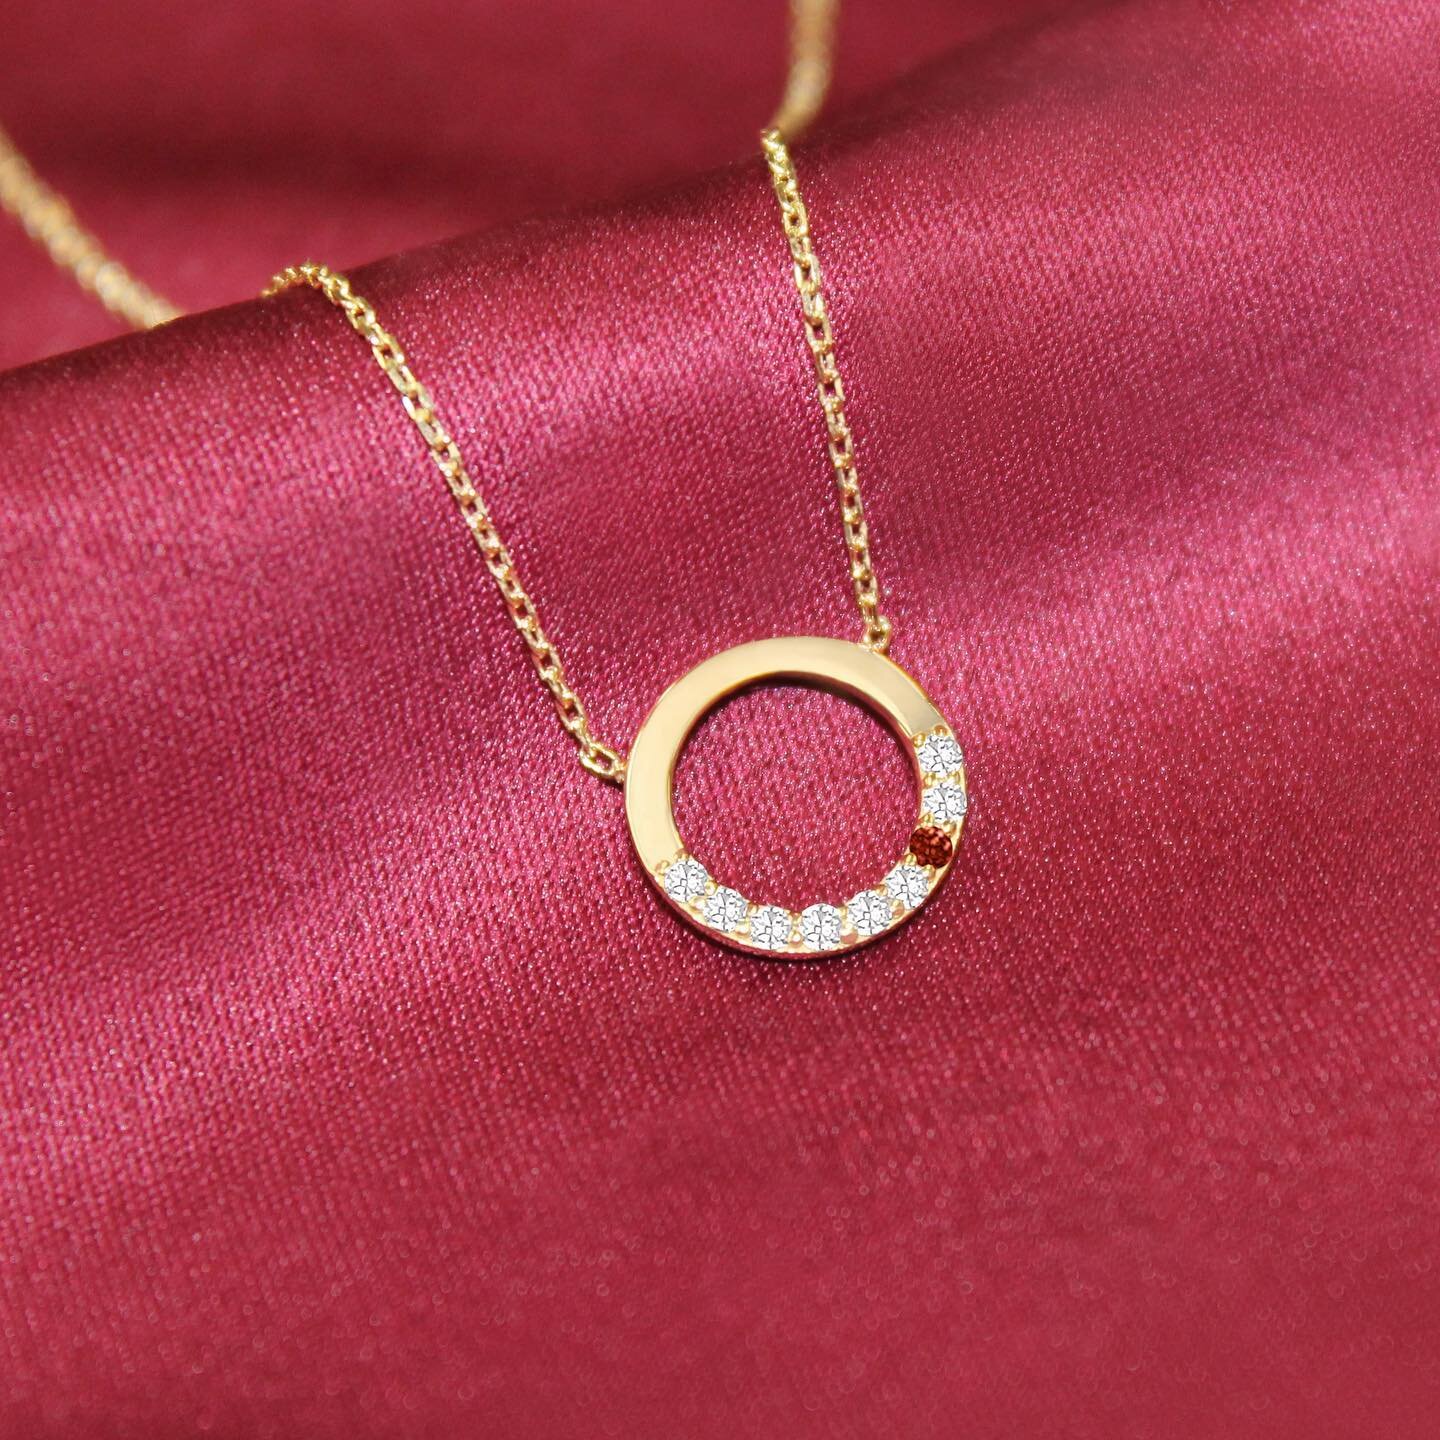 Valentines Day coming up! ❤️

Surprise your beloved one with this super nice gold necklace with a tiny touch in the colour of love 

Available in both 14k and 18k gold

#goldjewellery #valentine #swingjewels #circleoflove #14kgold #18kgold #instoresn